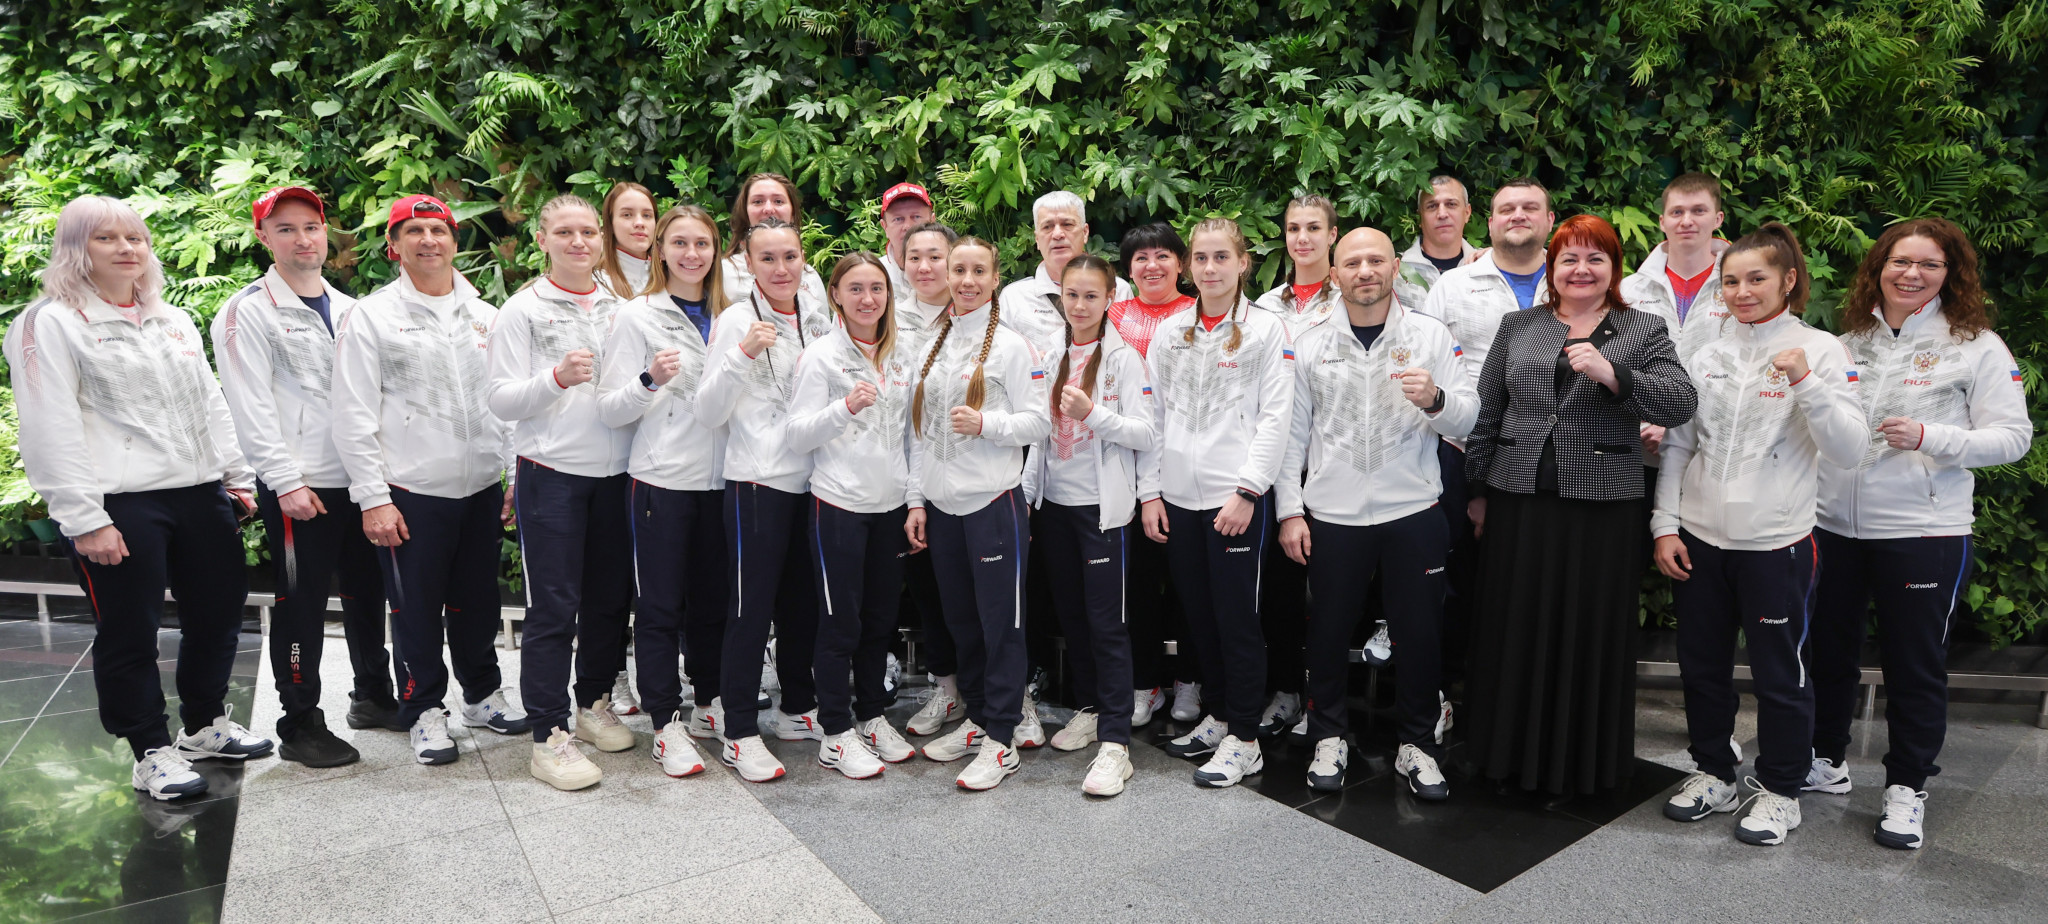 Twelve athletes have been selected to represent Russia at the IBA Women's World Championships in New Delhi ©Russian Boxing Federation